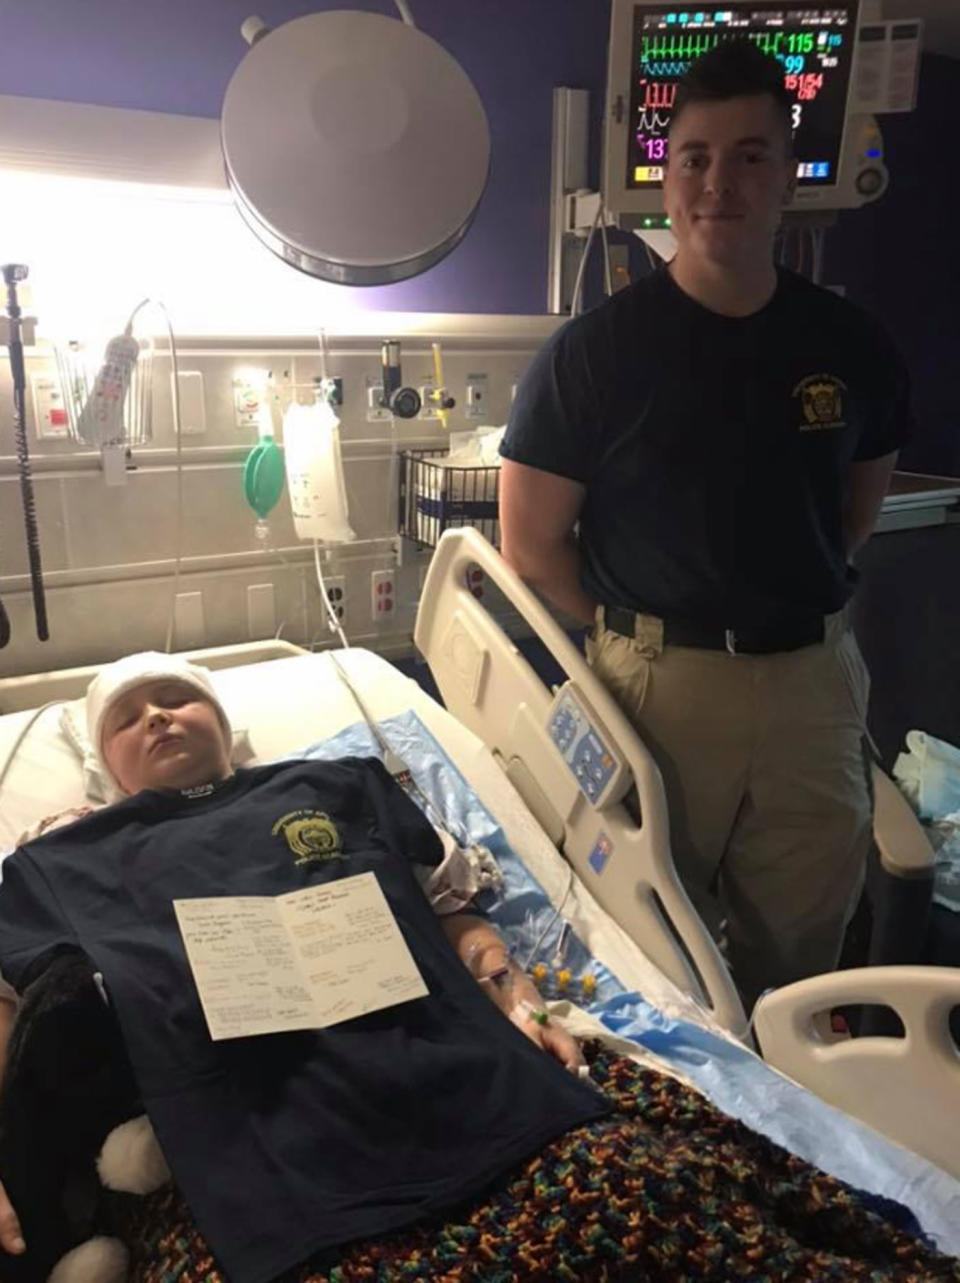 Tommy Gallagher and waiter Drew Lewis in hospital. Source: Facebook/Krista Gallagher